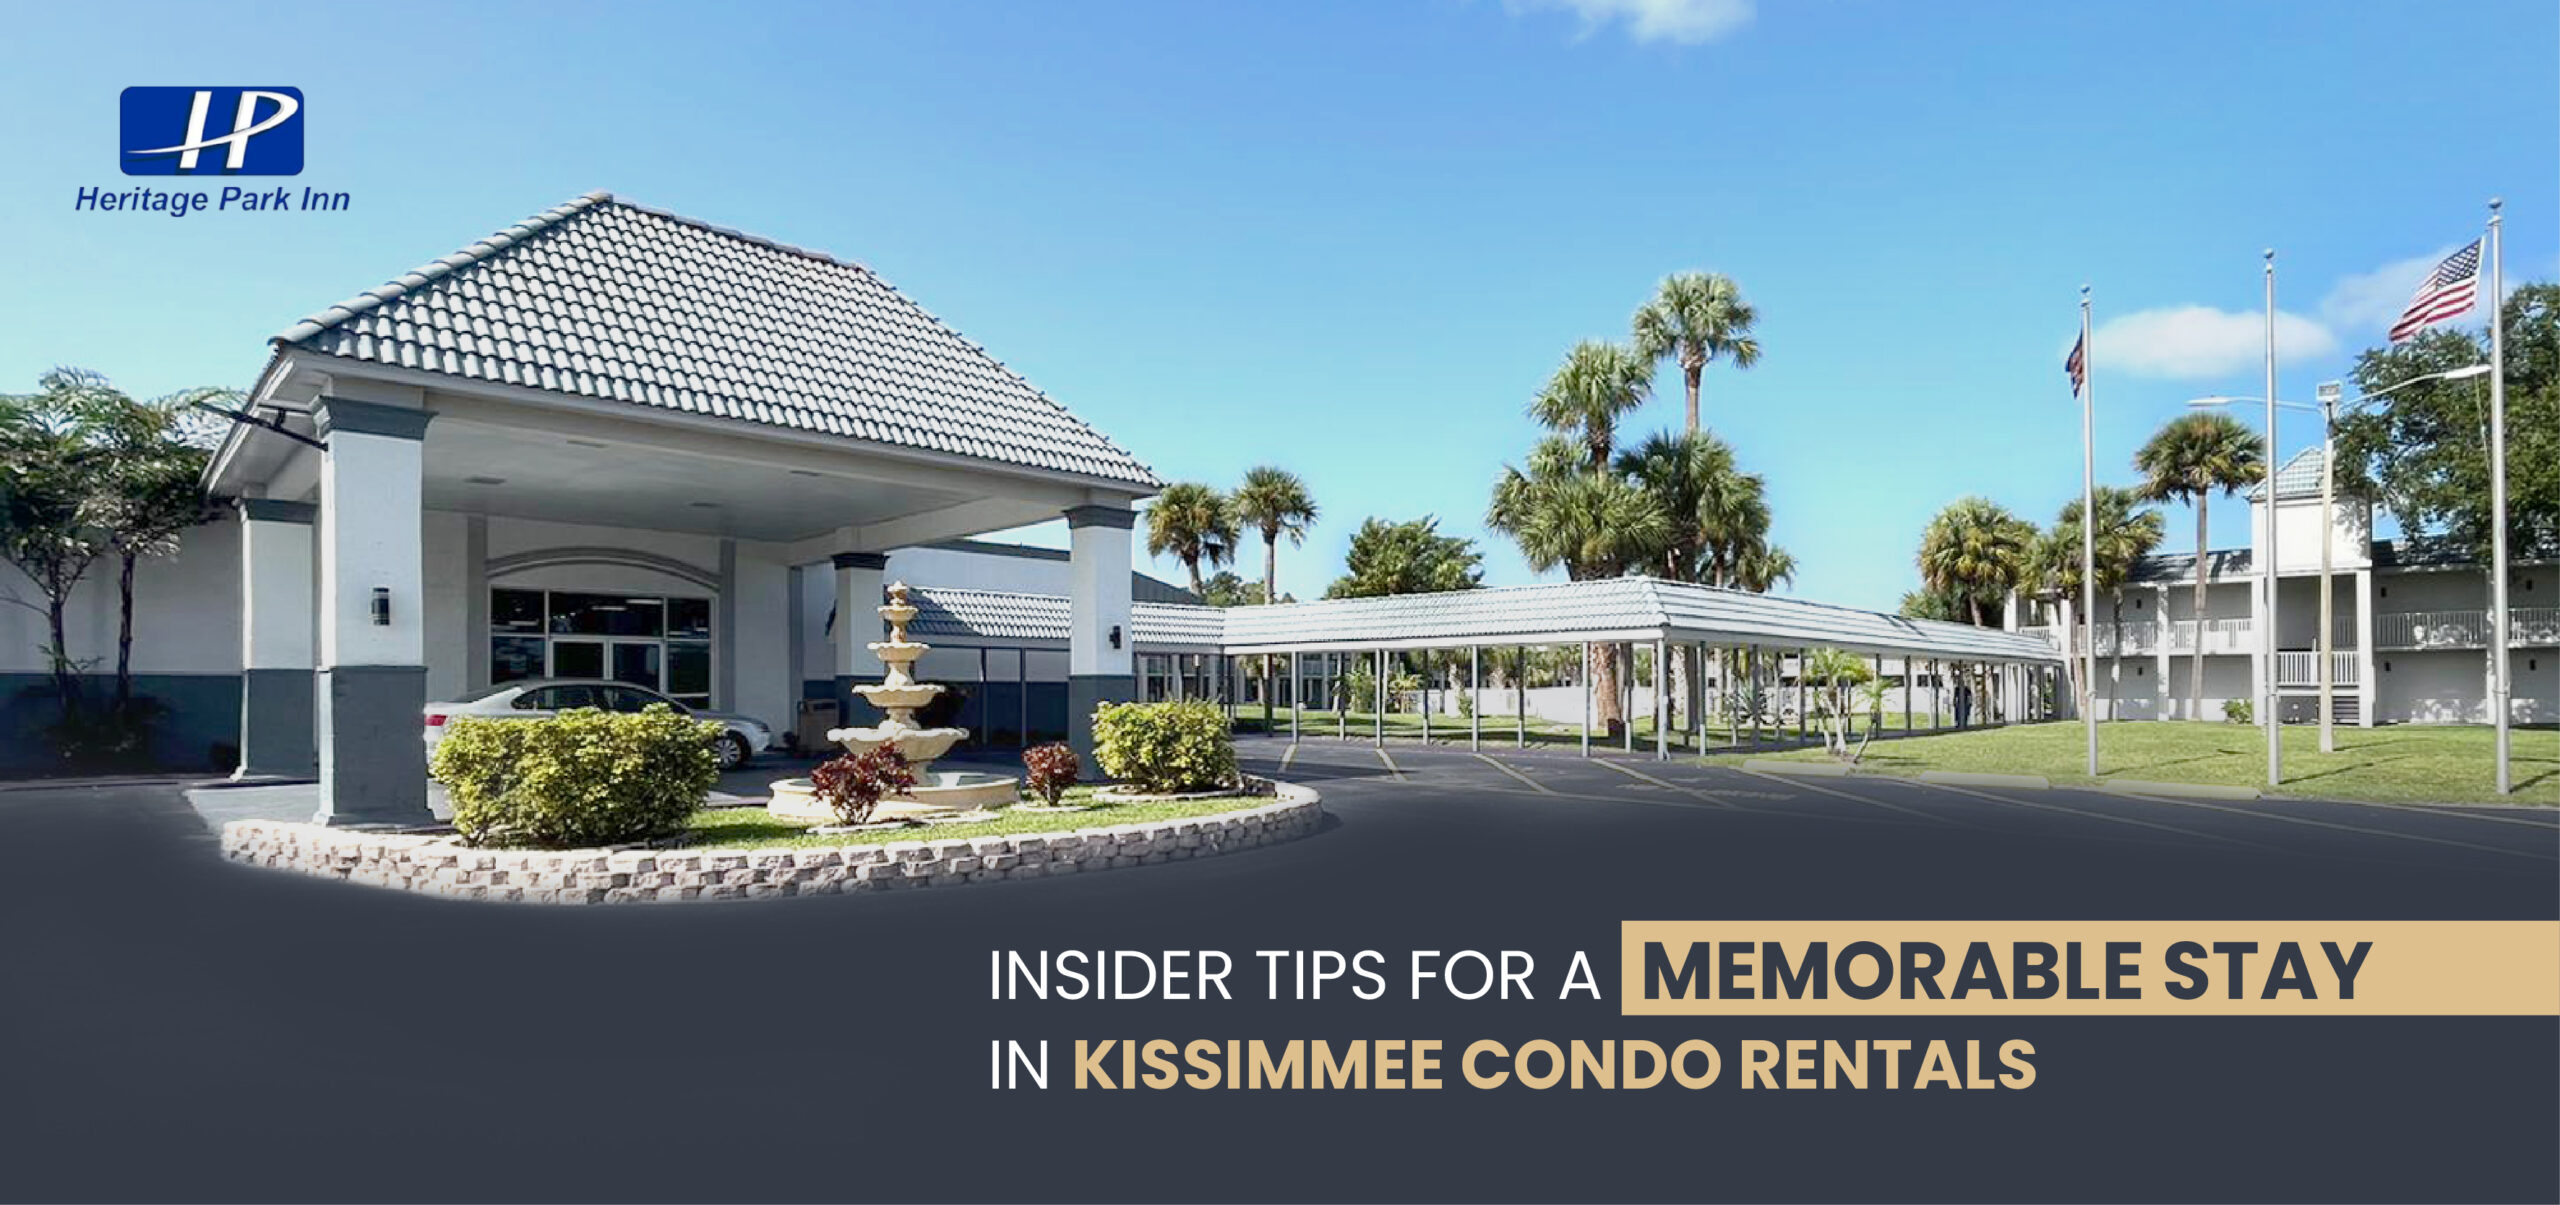 Insider Tips for a Memorable Stay in Kissimmee, Florida Condo Rentals